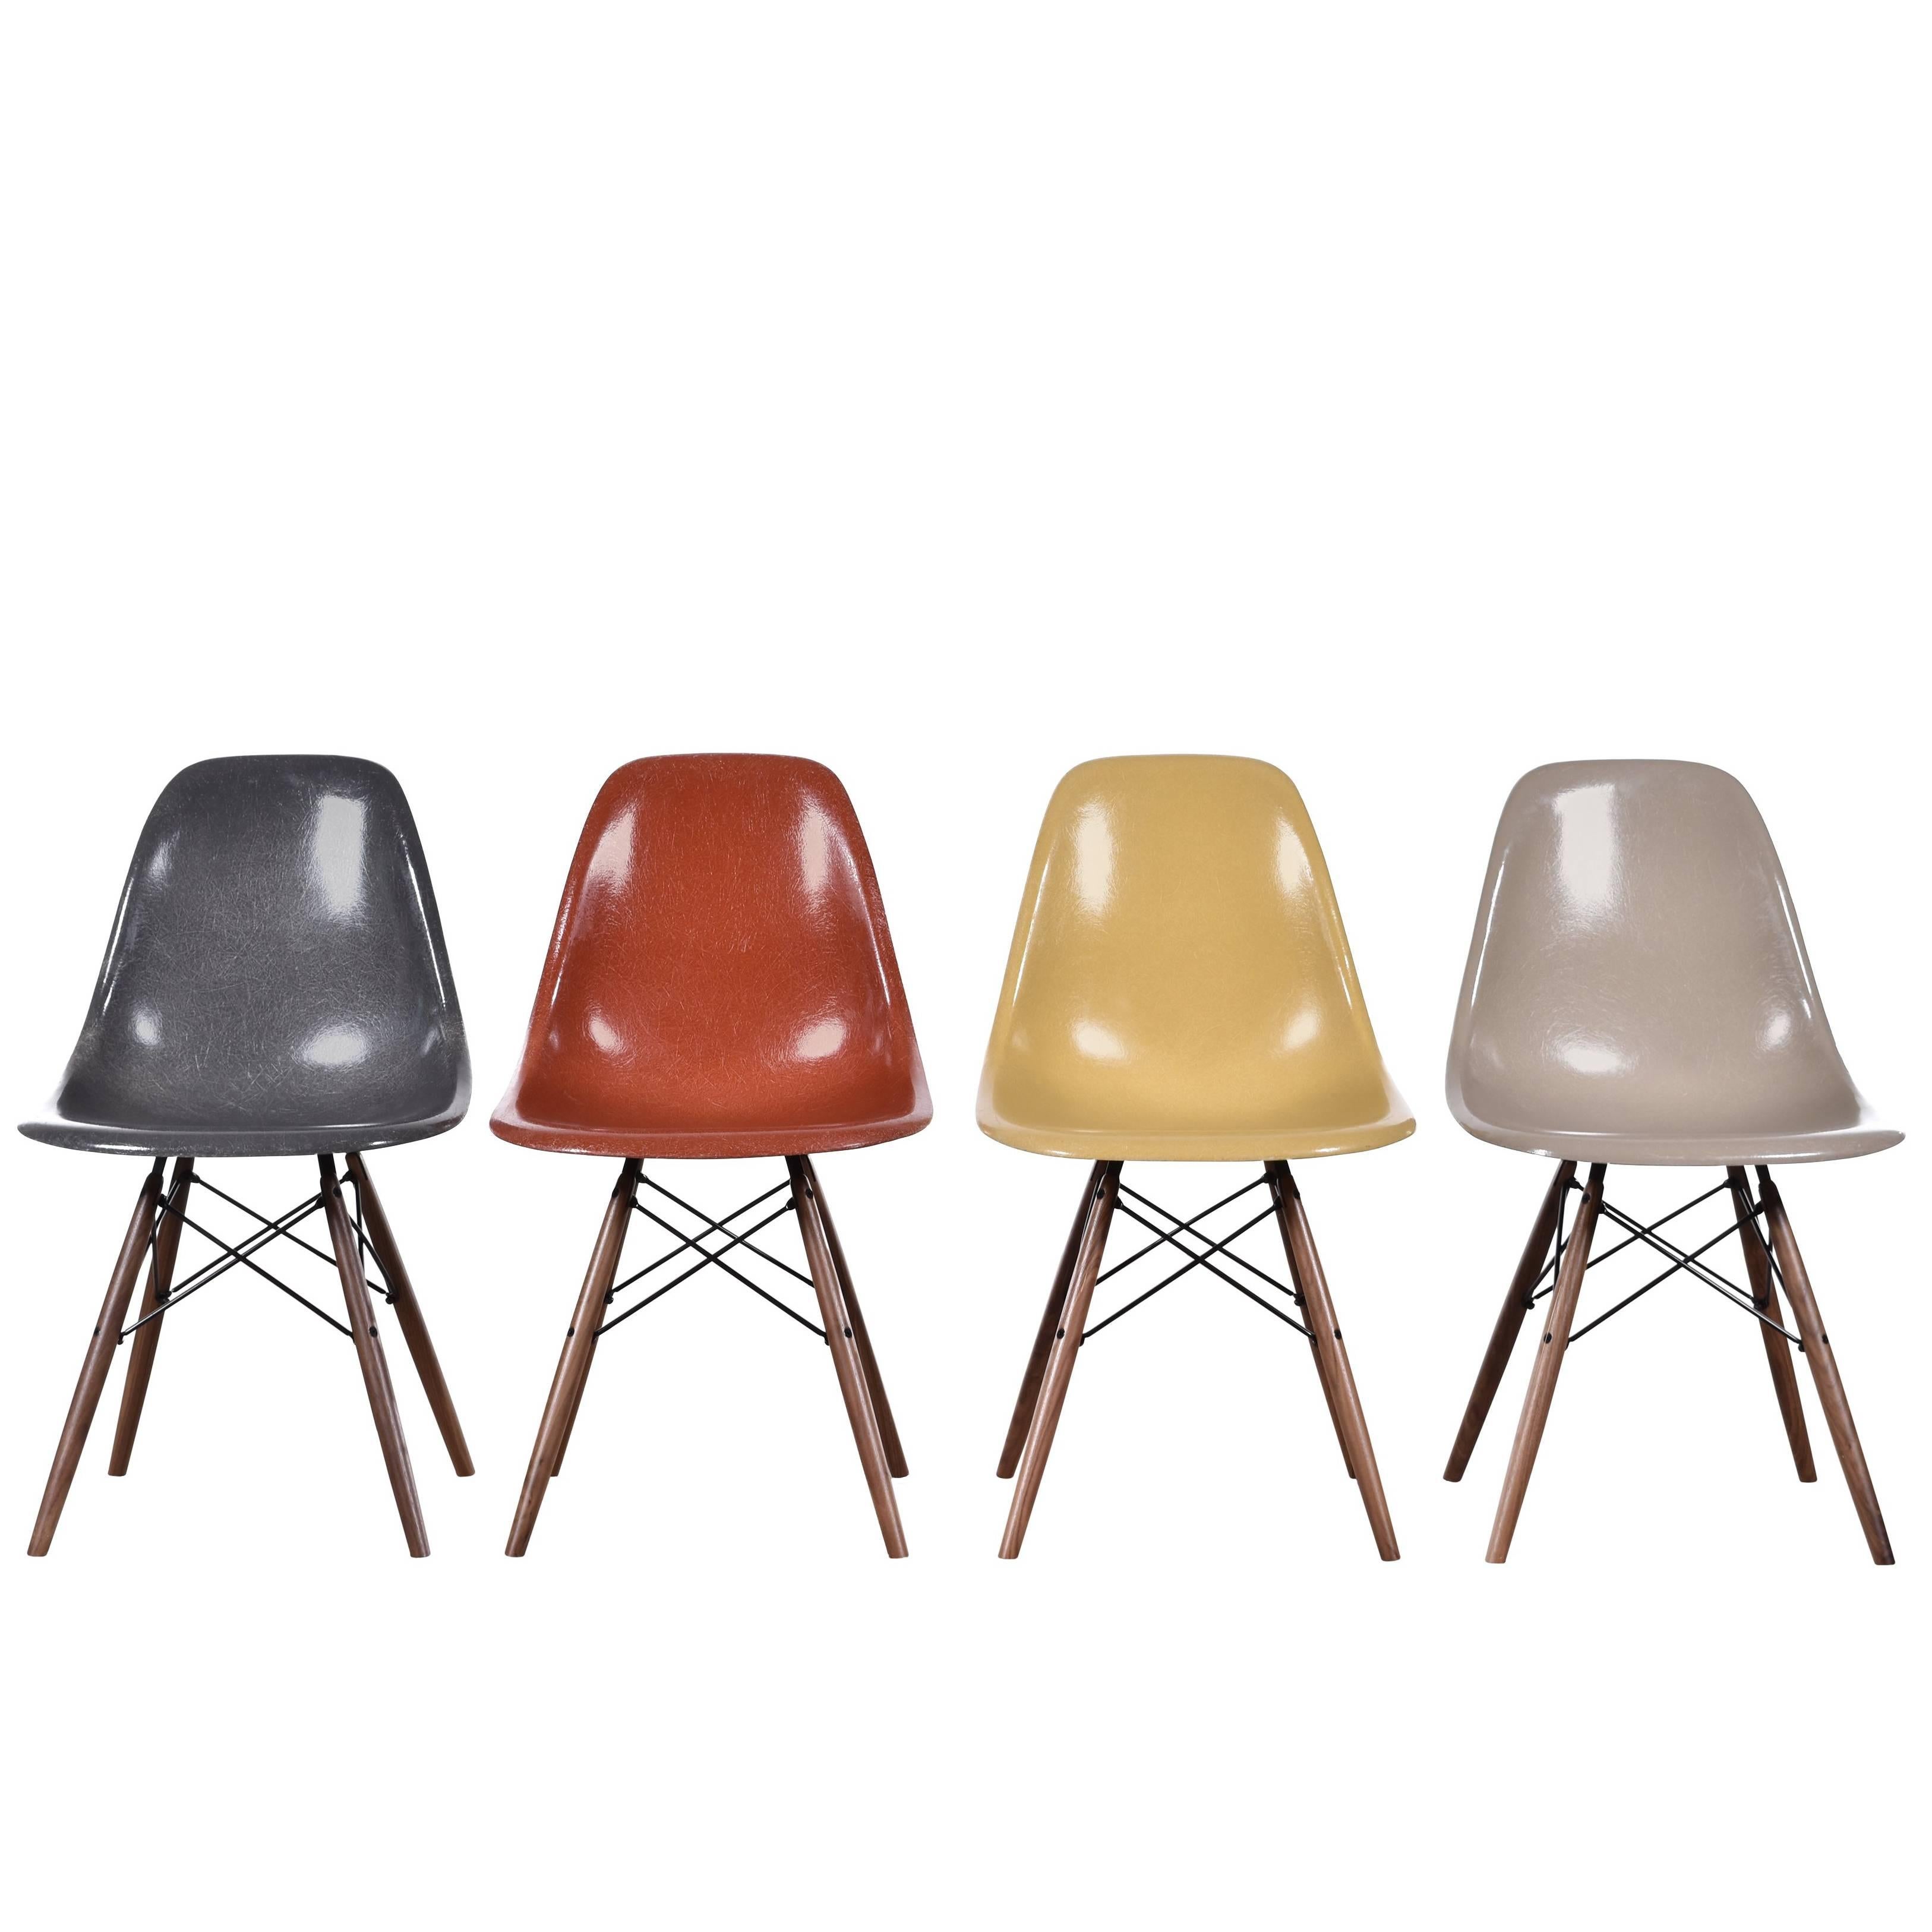 Set of Four Eames DSW Herman Miller, USA Dining Chairs - Grey, Red, Ochre, Beige